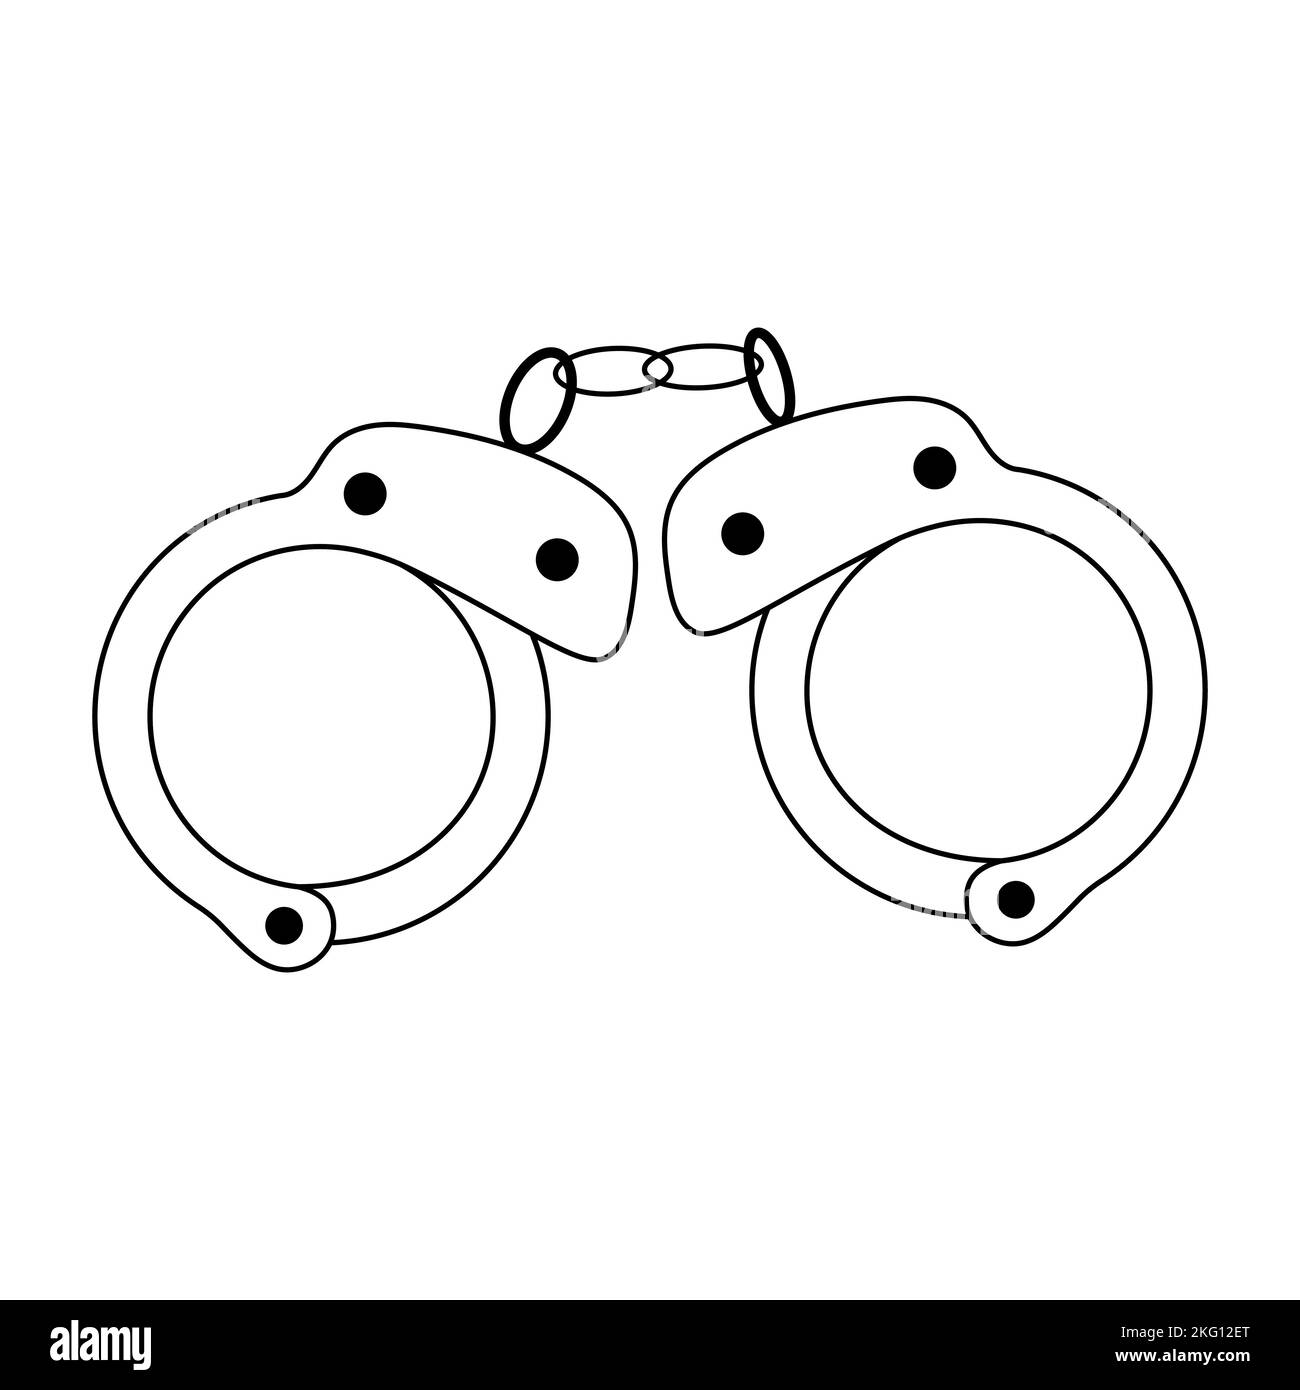 Handcuffs tattoo in y2k, 1990s, 2000s style. Emo goth element design. Old school tattoo. Vector illustration. Stock Vector